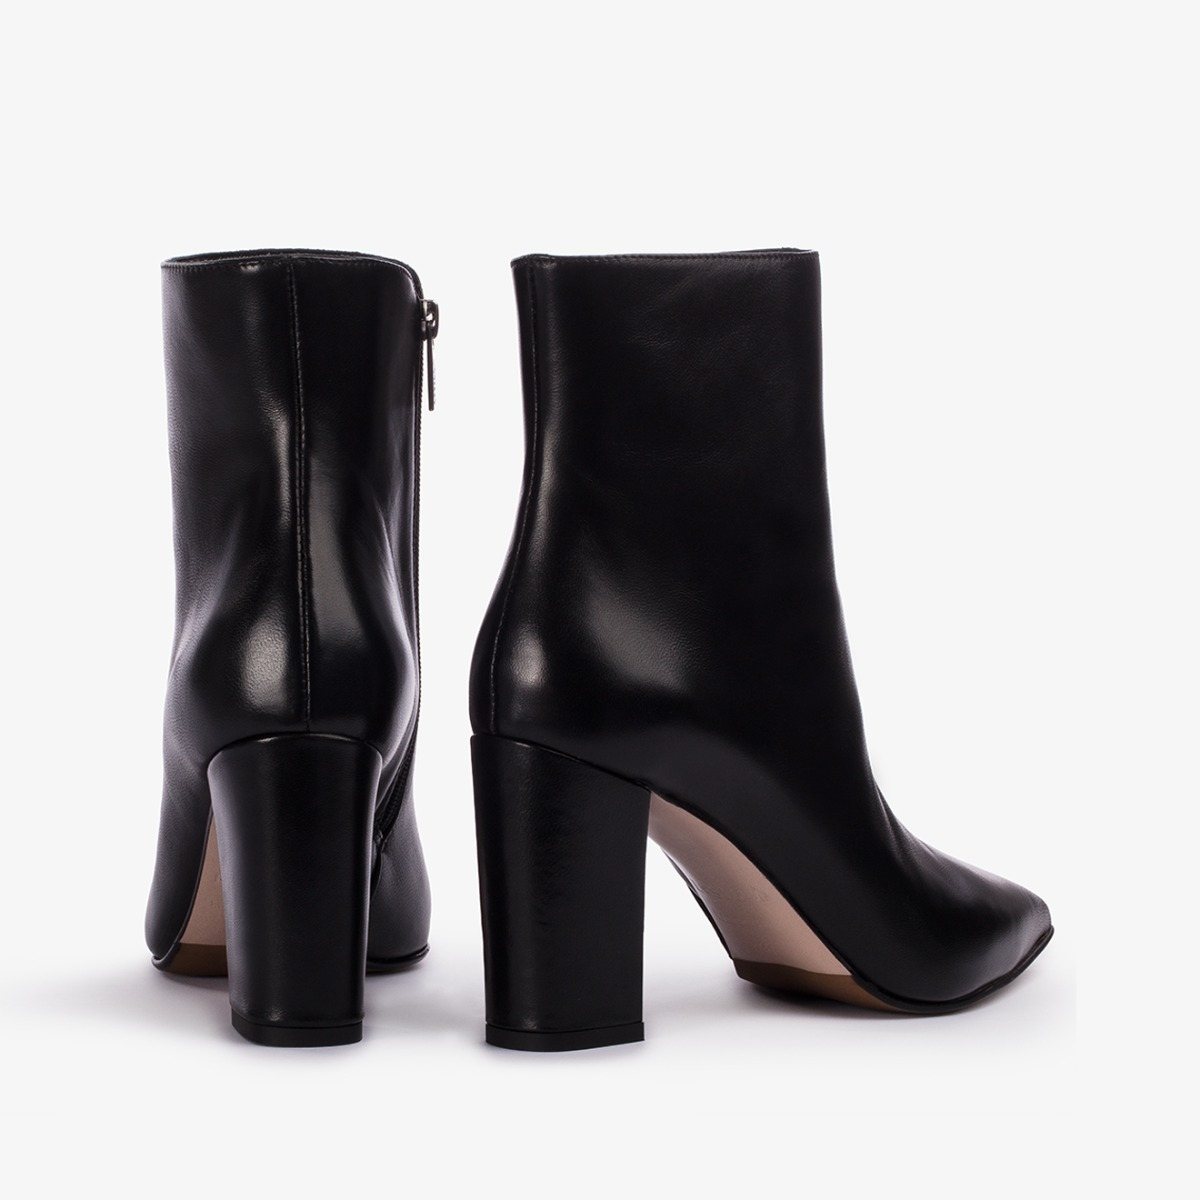 MEGAN ANKLE BOOT 90 mm - Le Silla official outlet